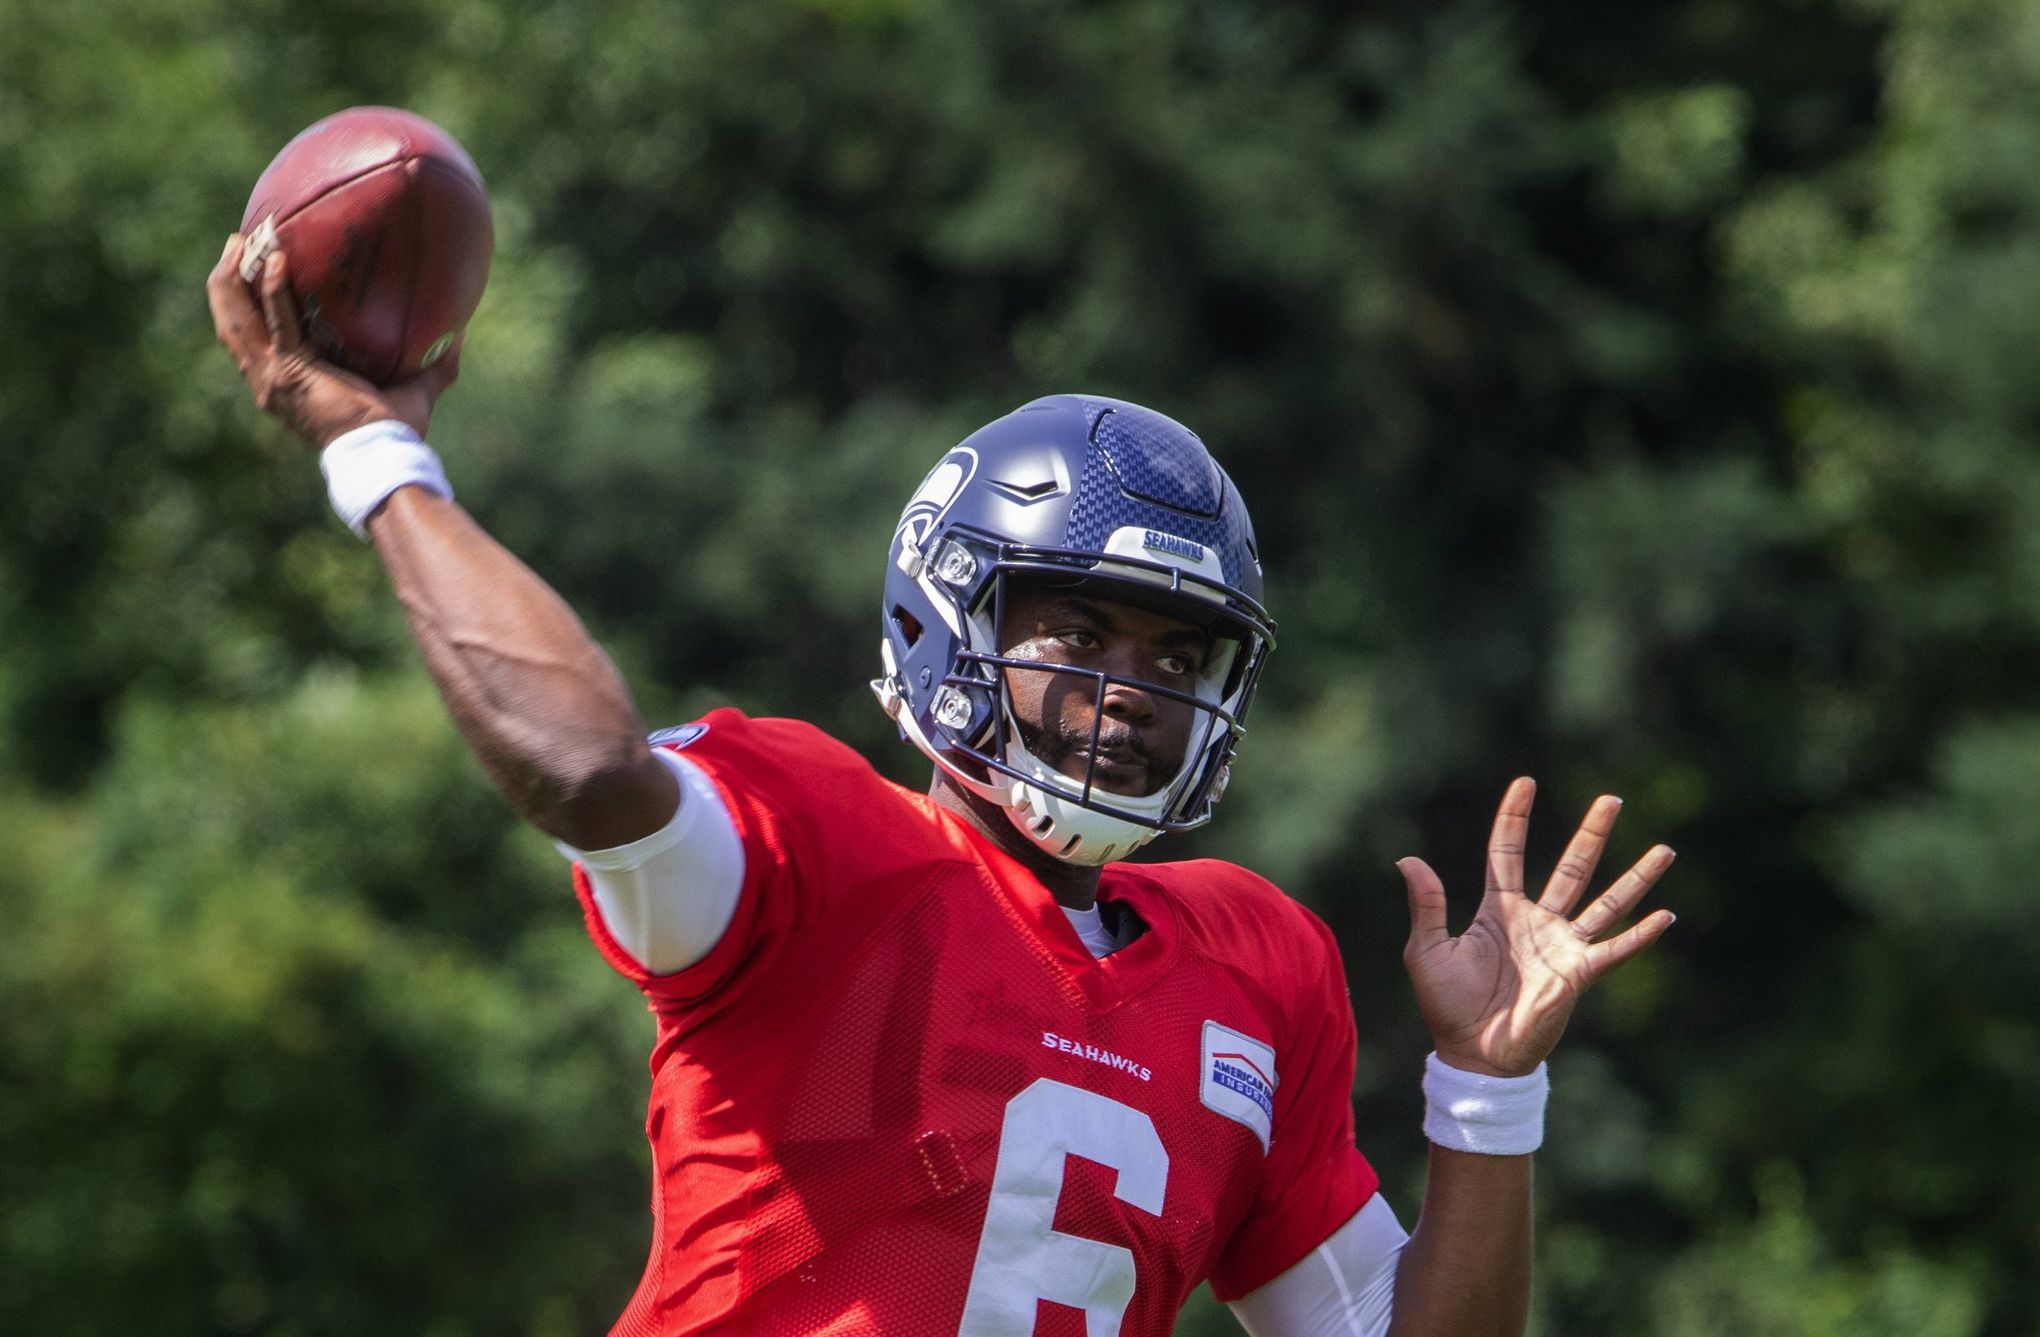 Return To New York “Just Another Opportunity” For Seahawks QB Geno Smith